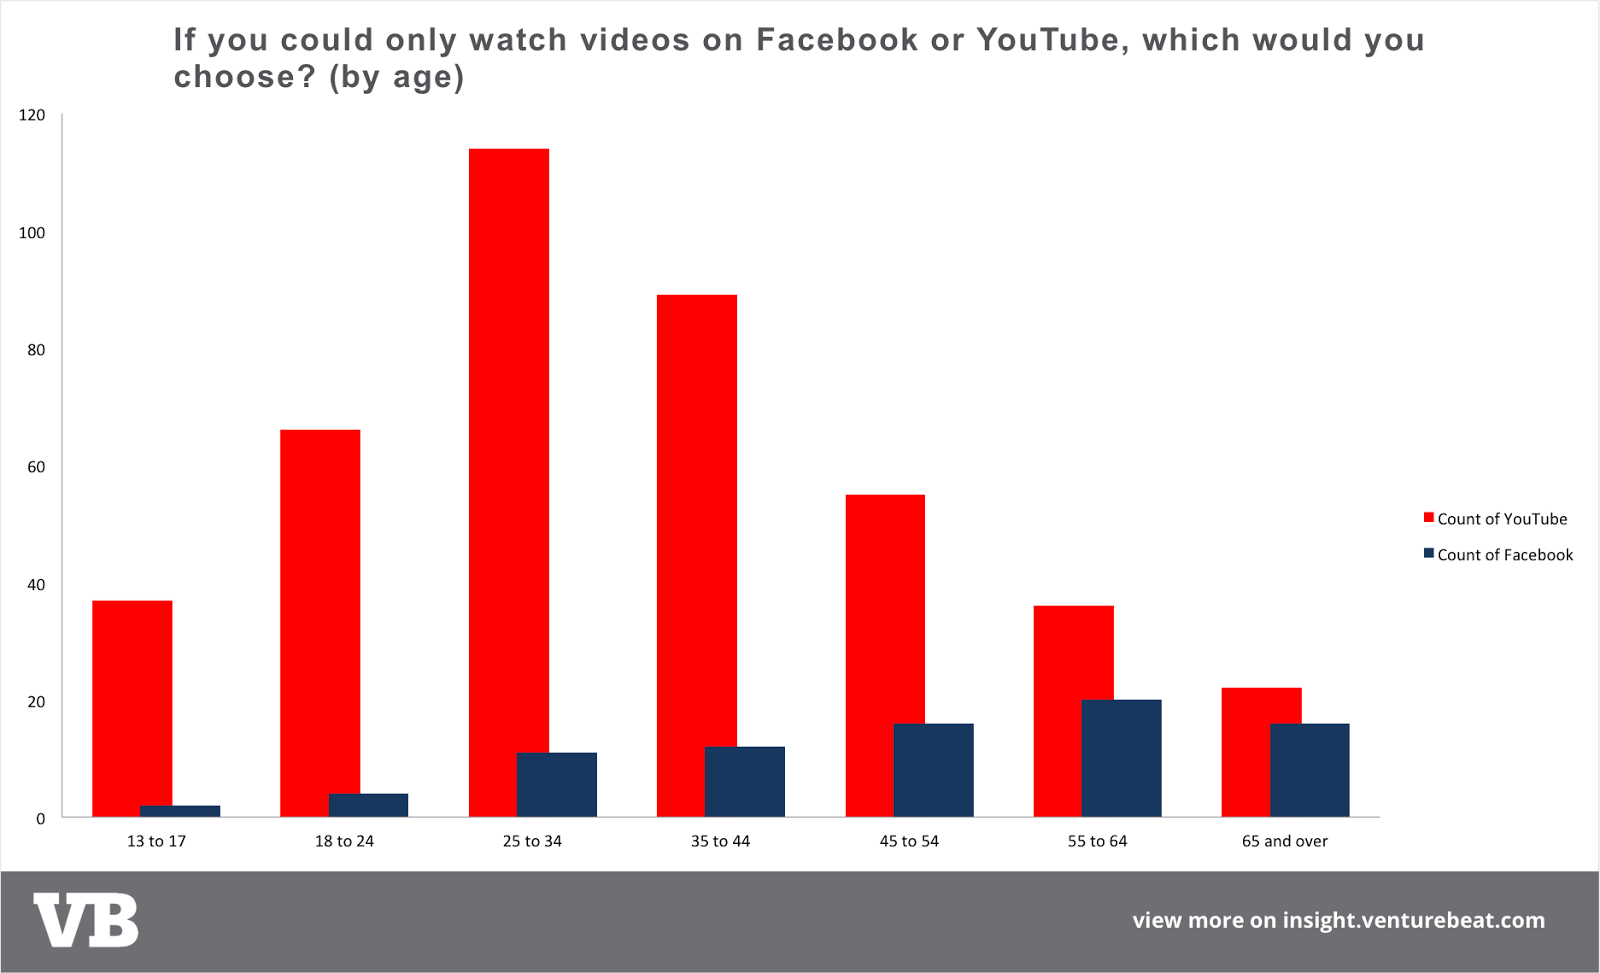 YouTube outperforms Facebook in digital video at all age levels